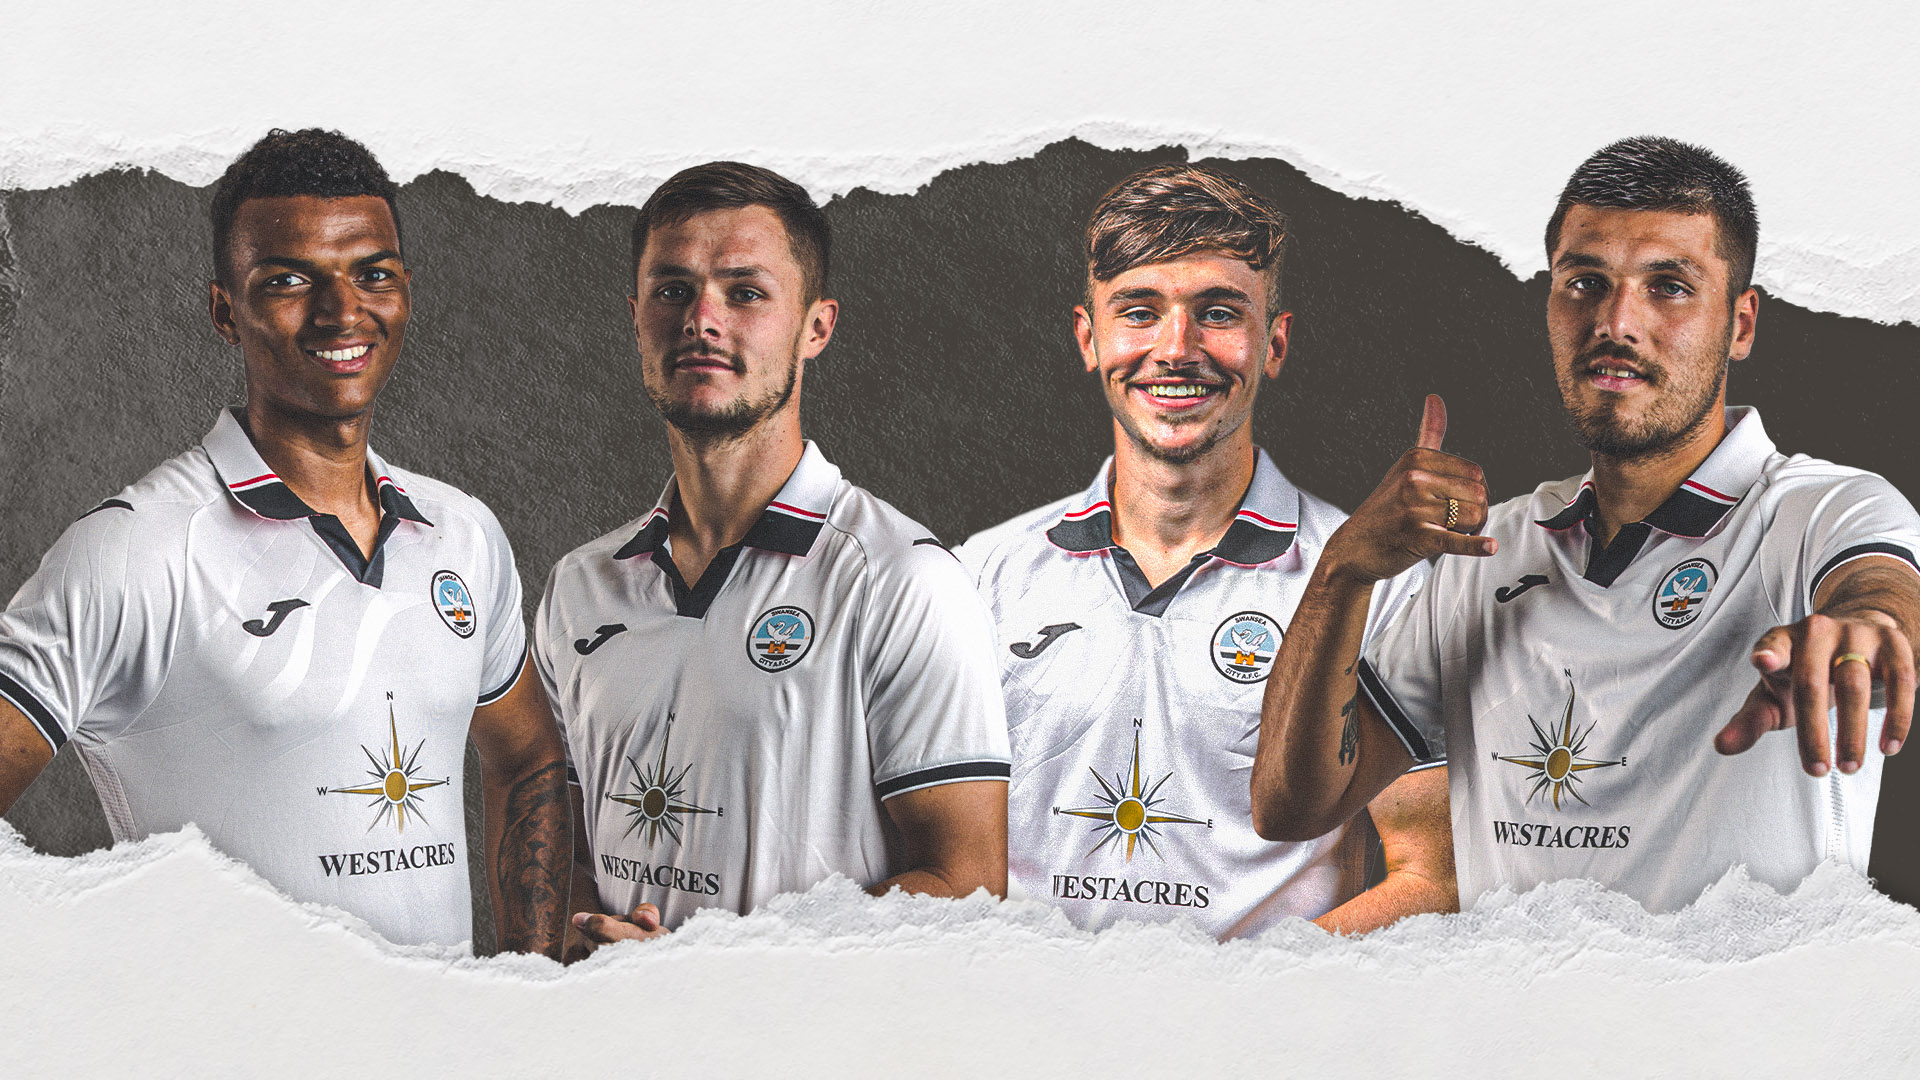 Meet the players in the club shop